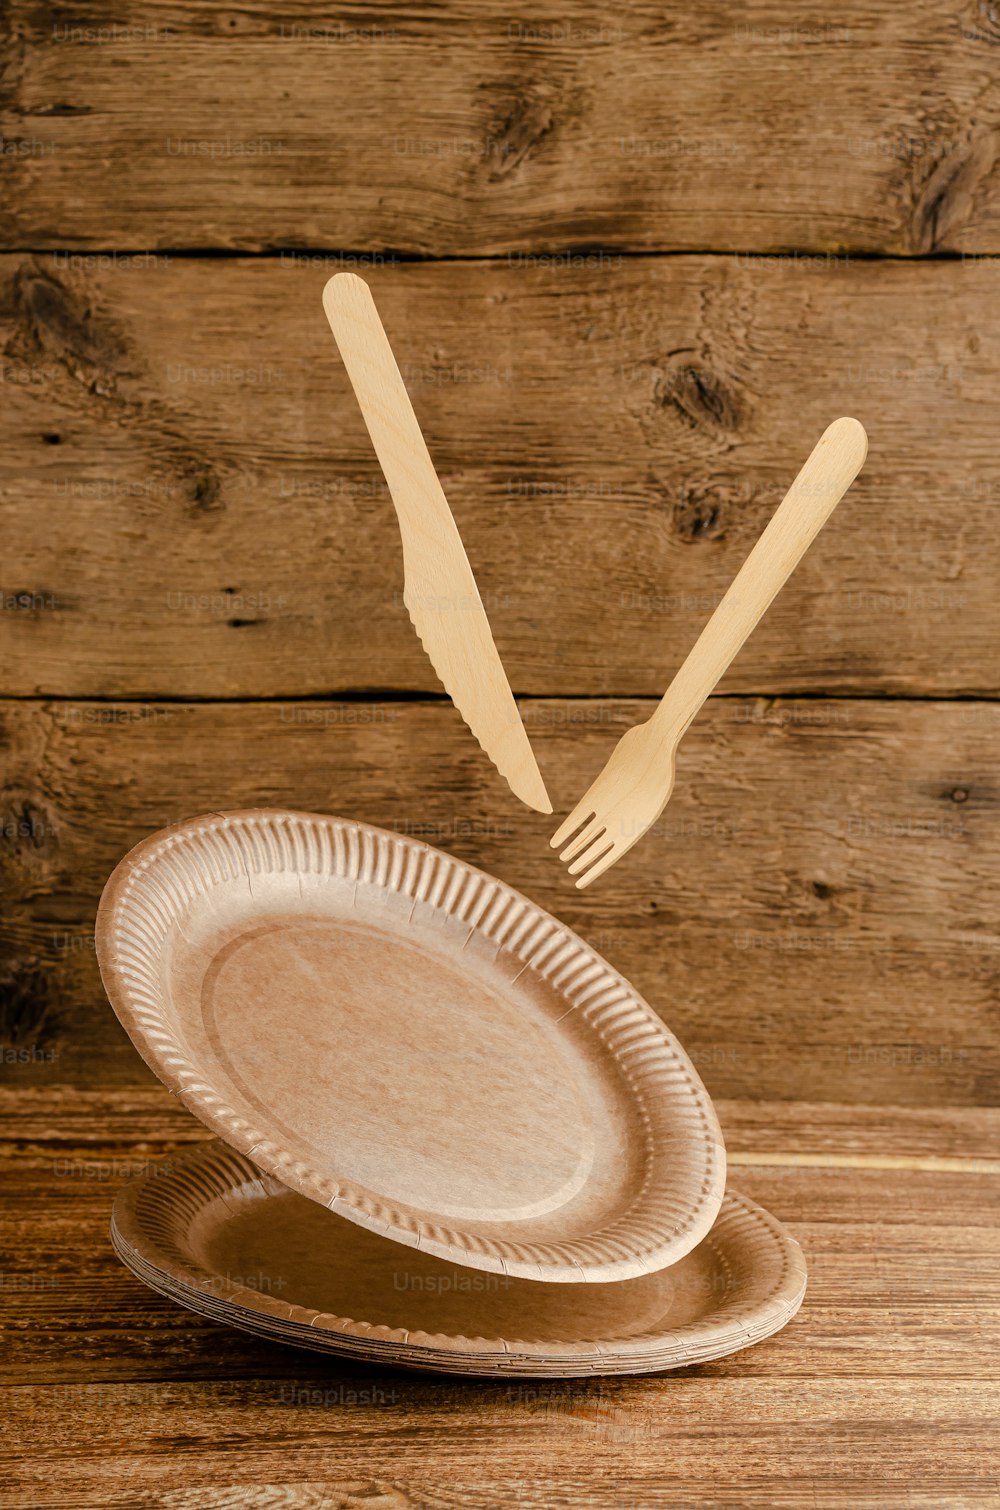 Flying disposable paper tableware on wooden background. Environmental care concept. Copy space.